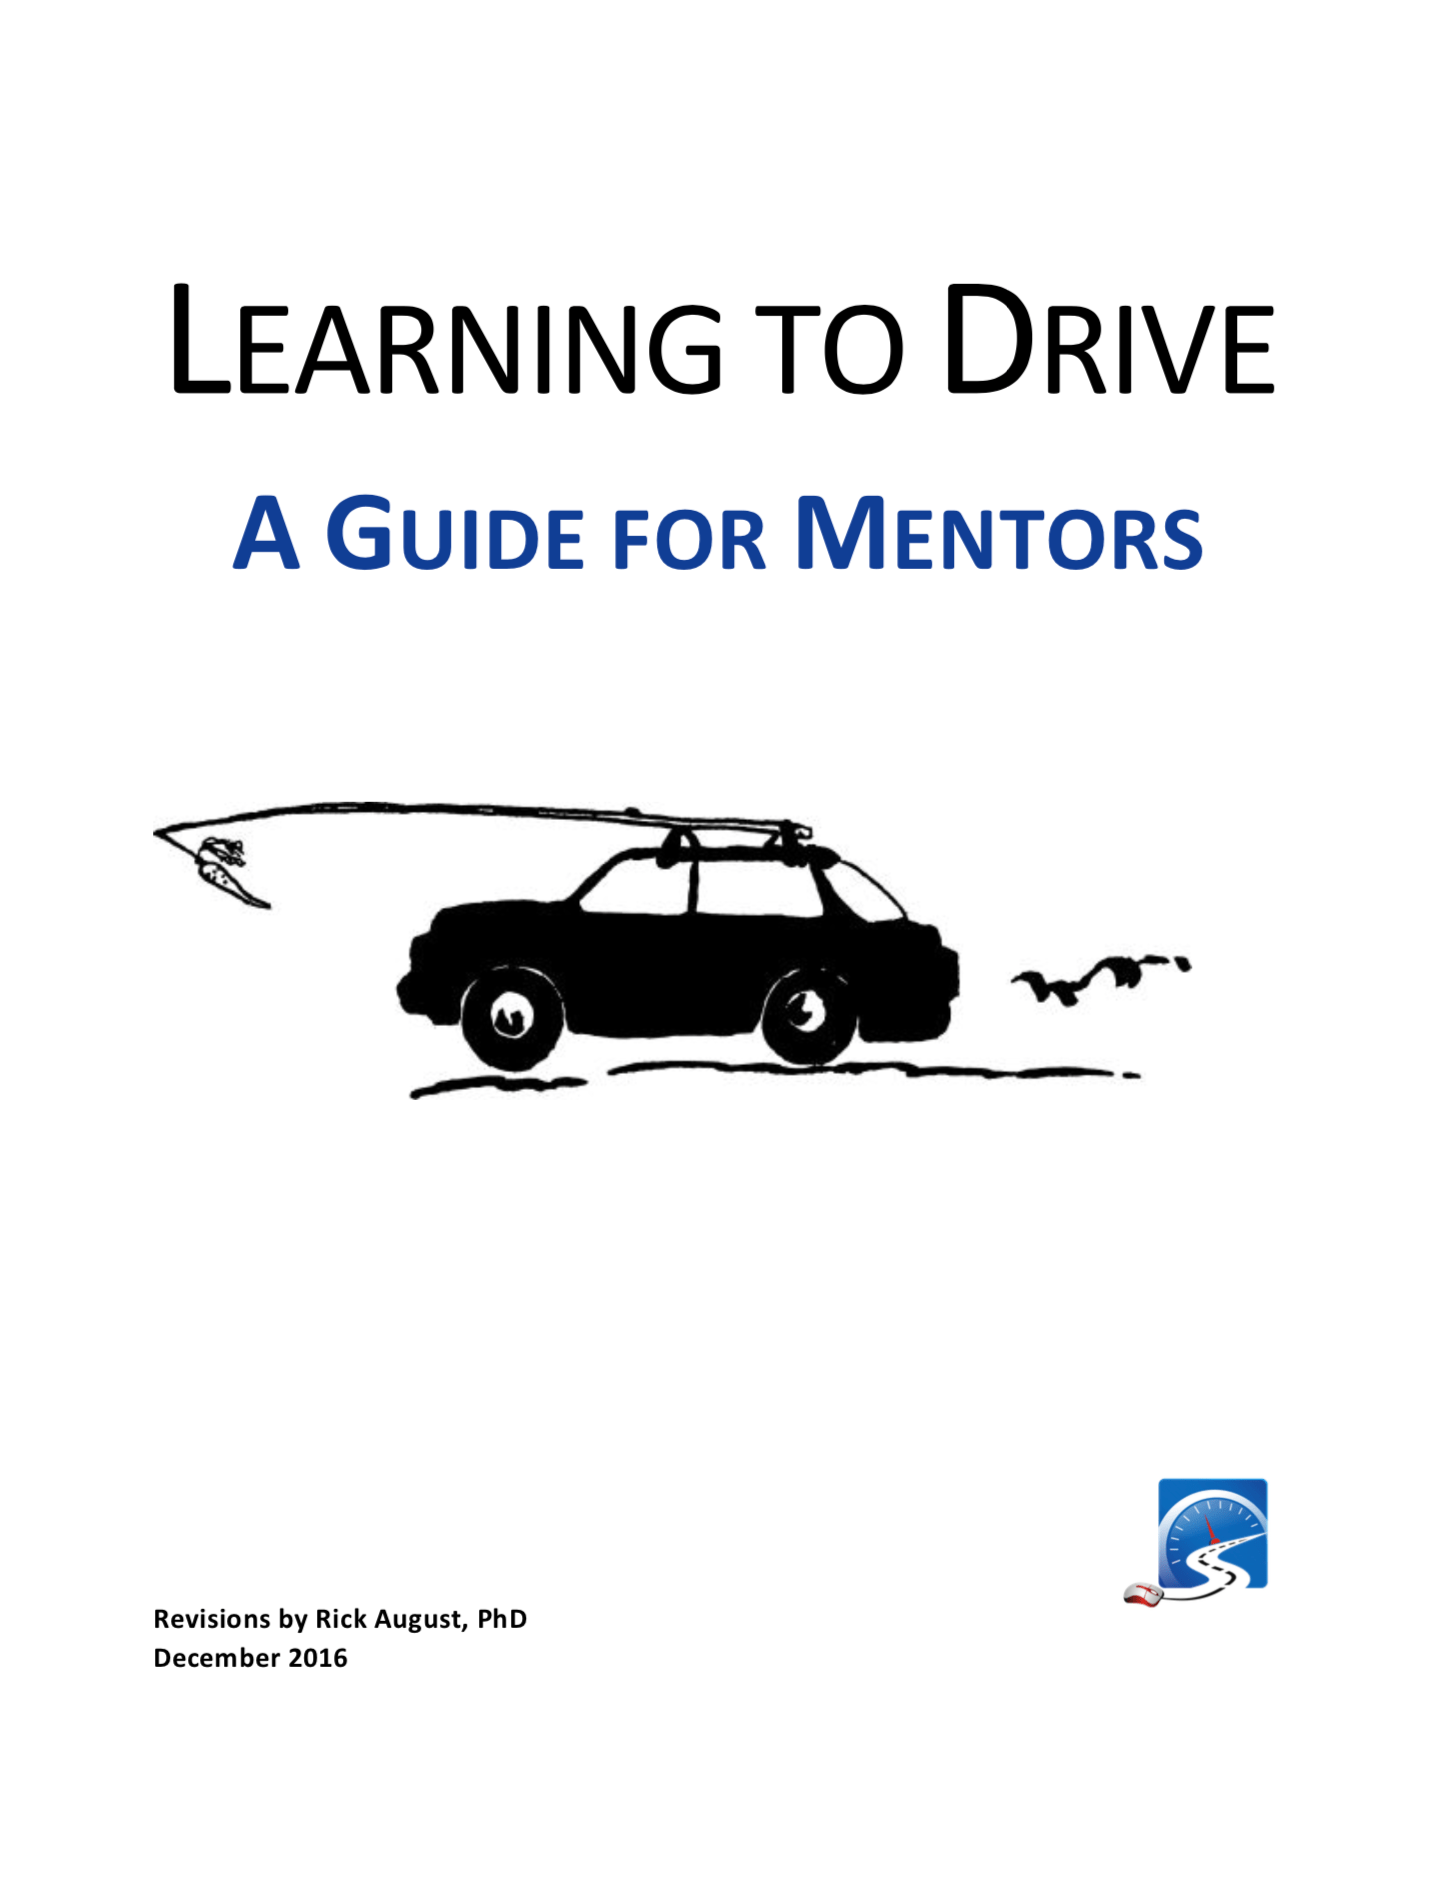 This free guide give helpful tips and strategies for mentors helping new drivers learn to drive.